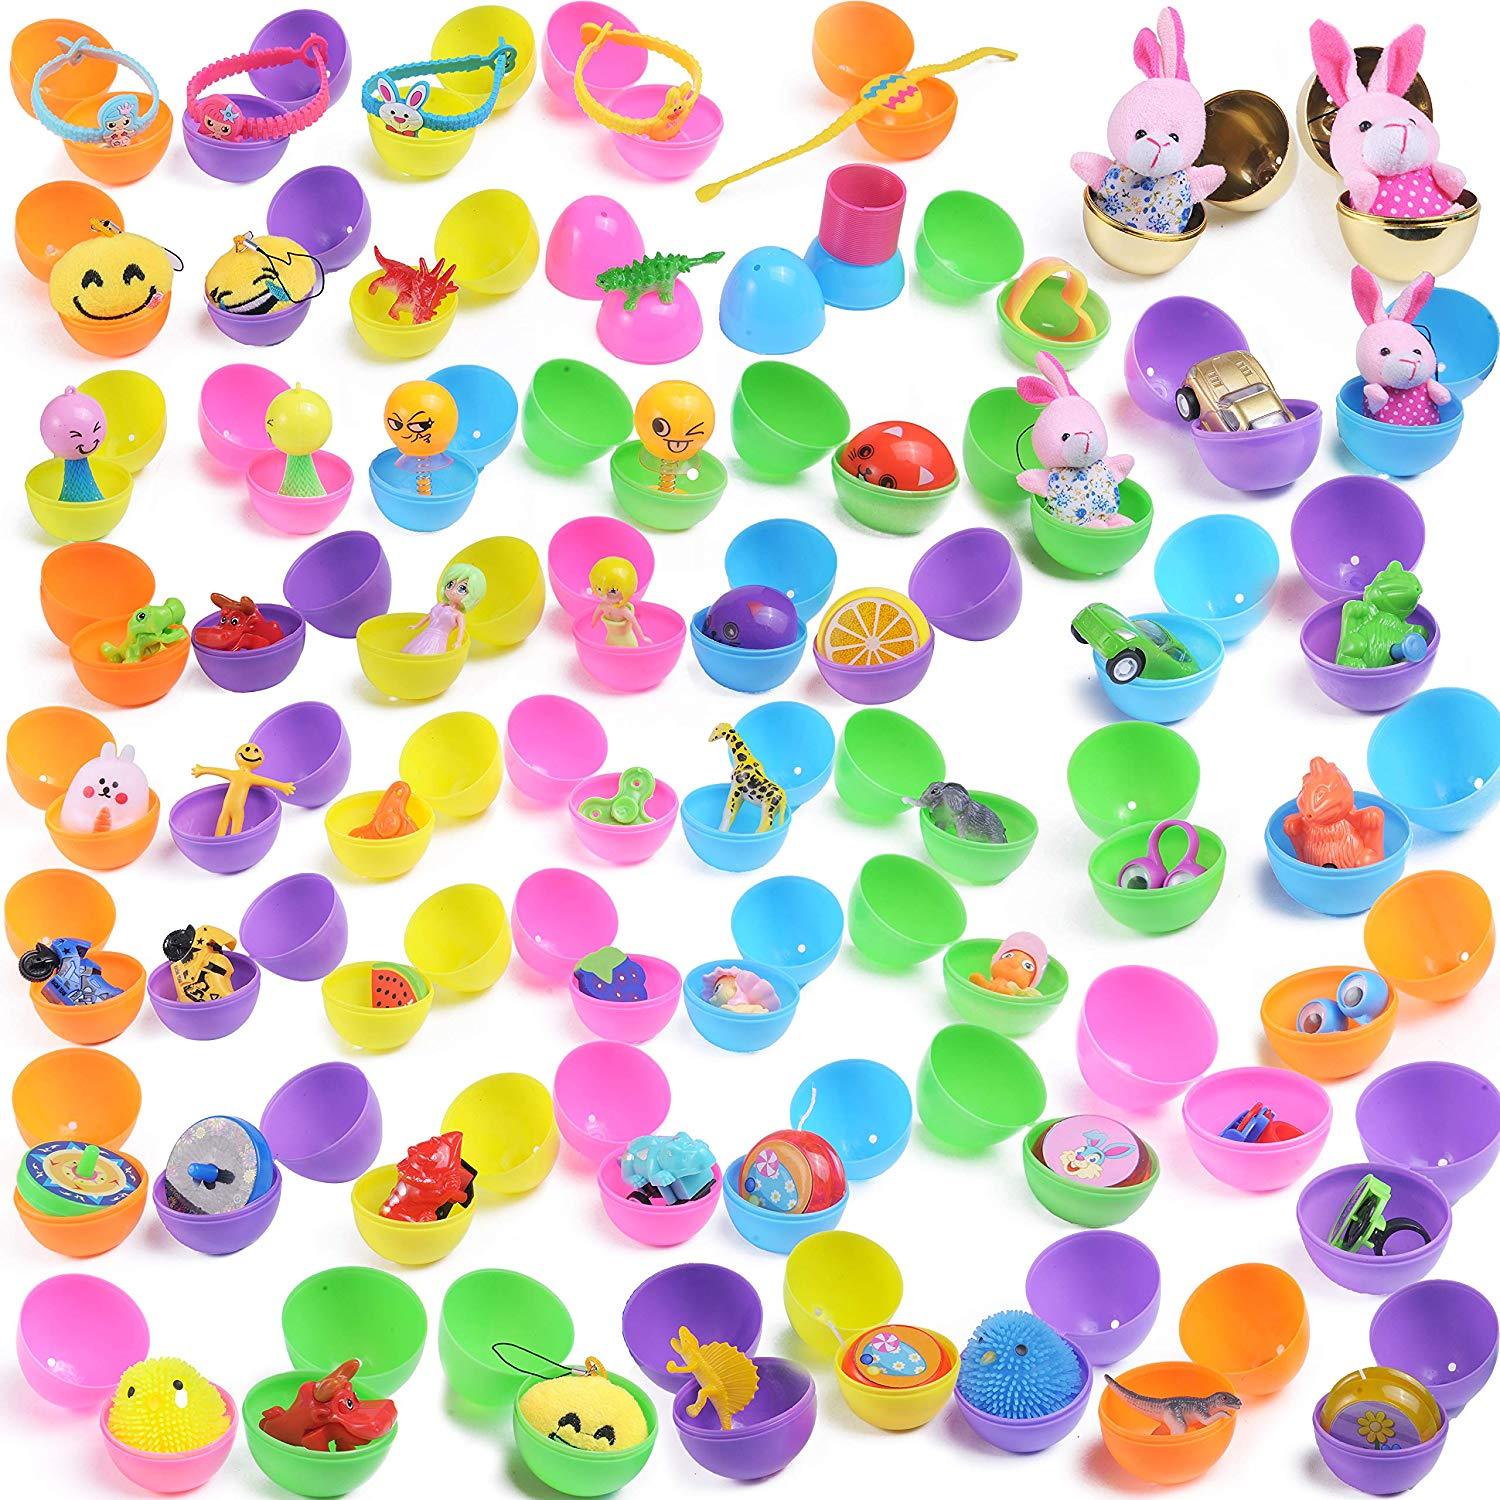 60pcs Prefilled Easter Eggs with Novelty Toys